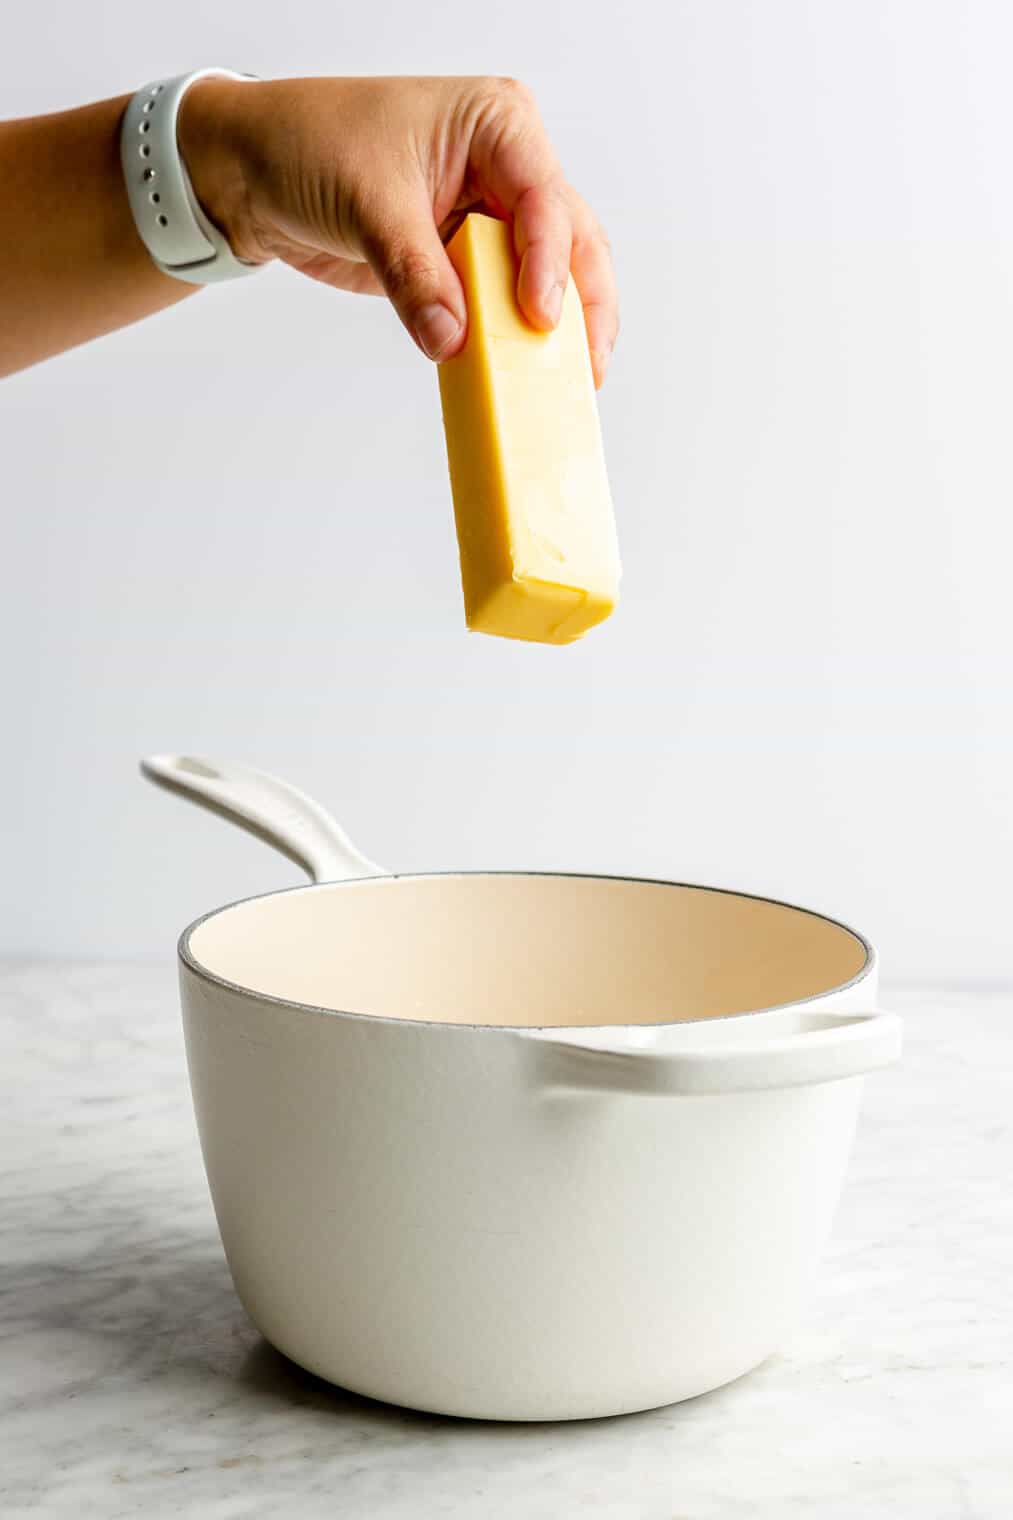 A person holding a stick of butter over a white pot.